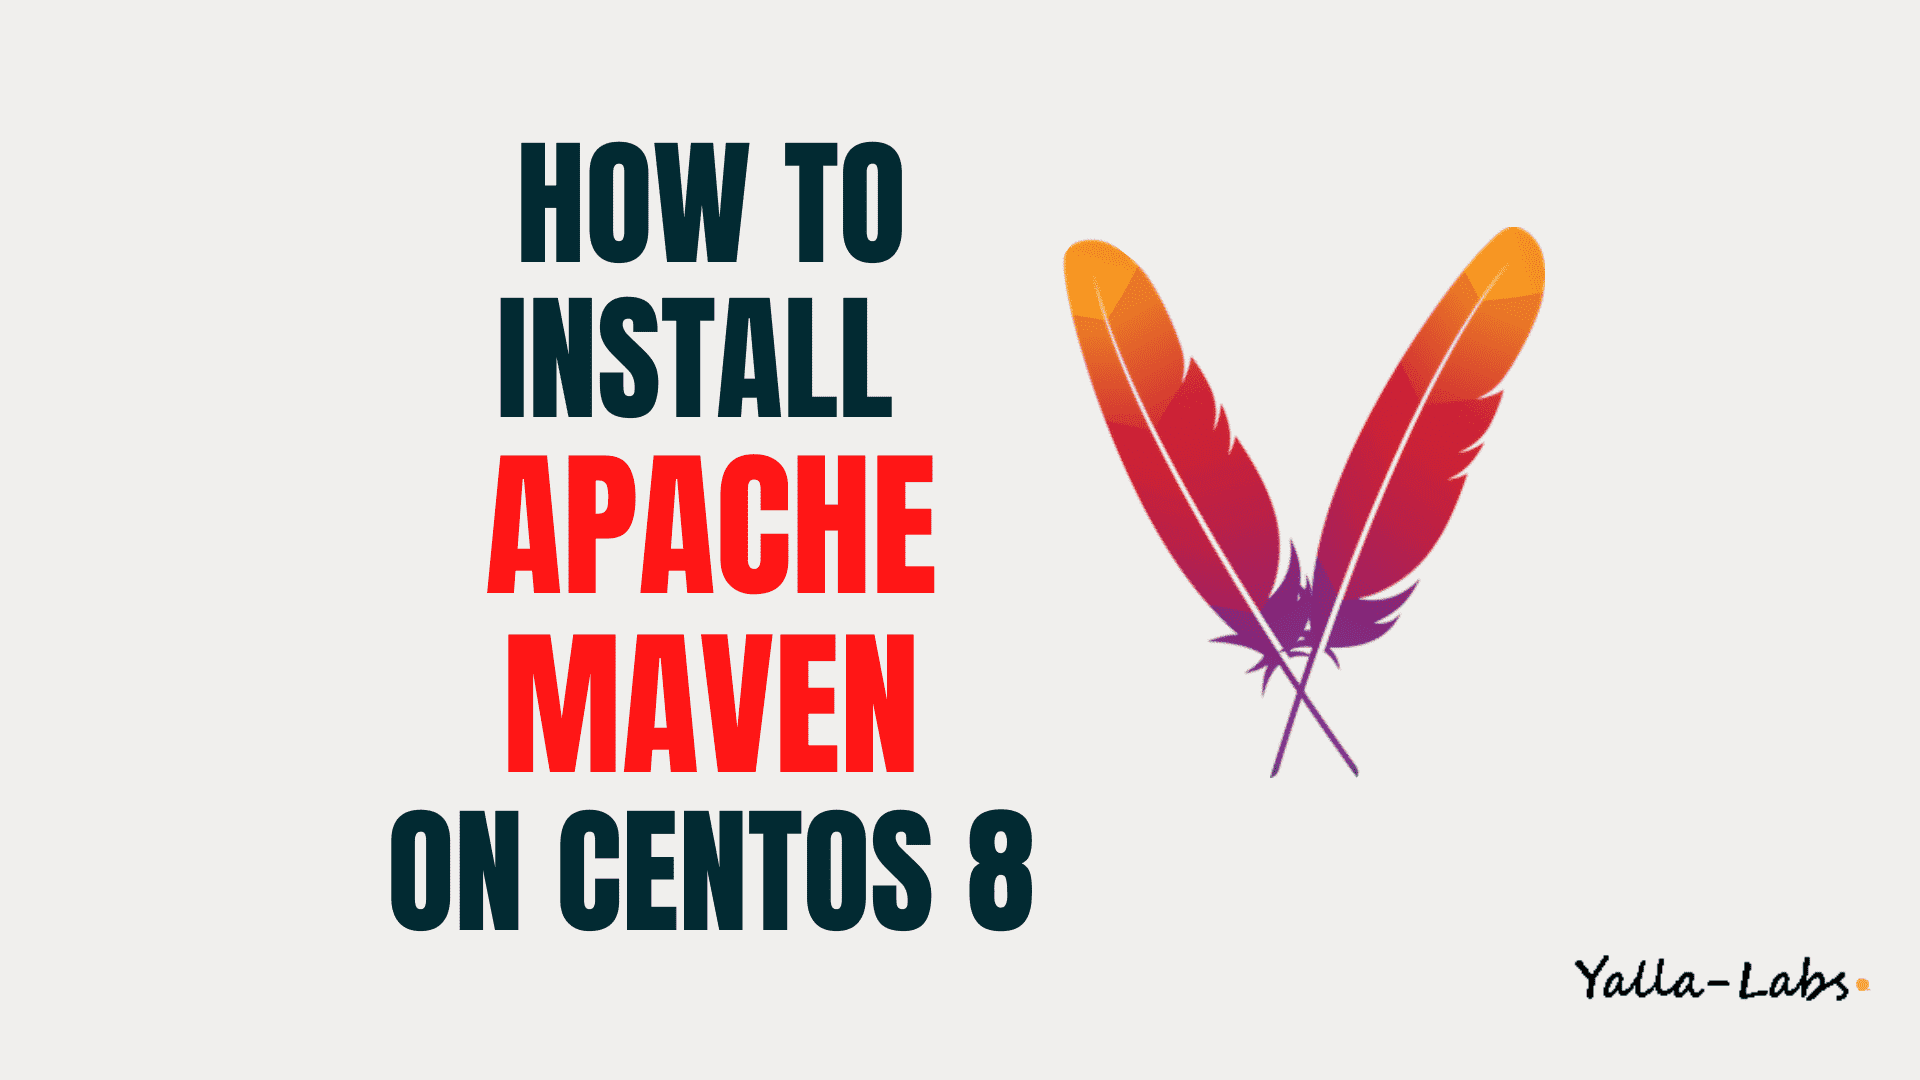 how to install maven in linux centos